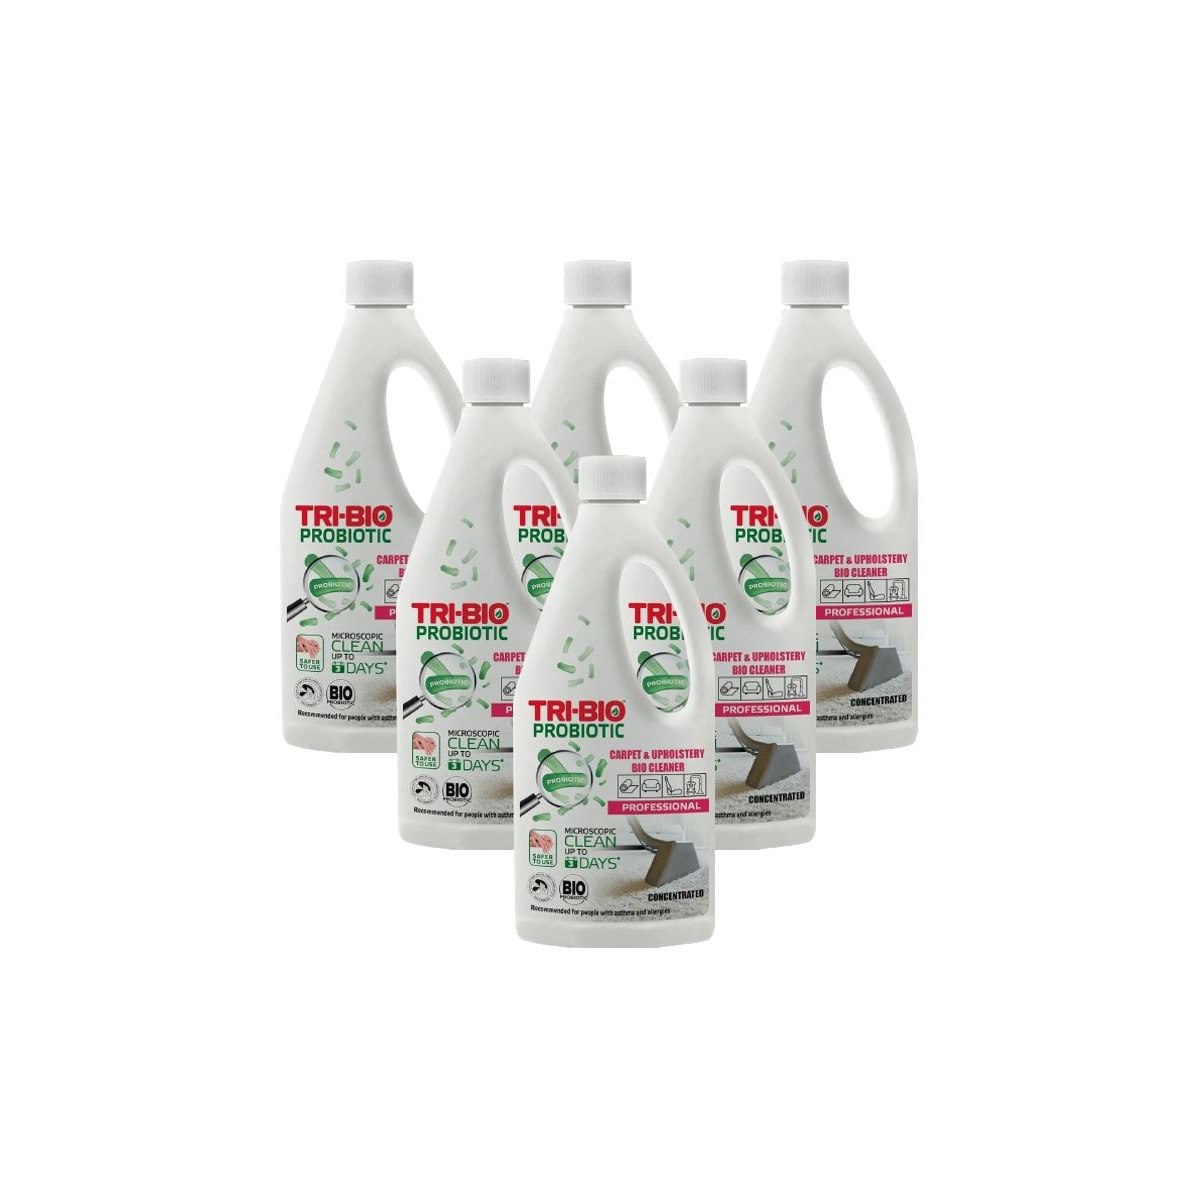 Case of 6 x Tri-Bio Eco Probiotic Carpet and Upholstery Cleaner 420ml